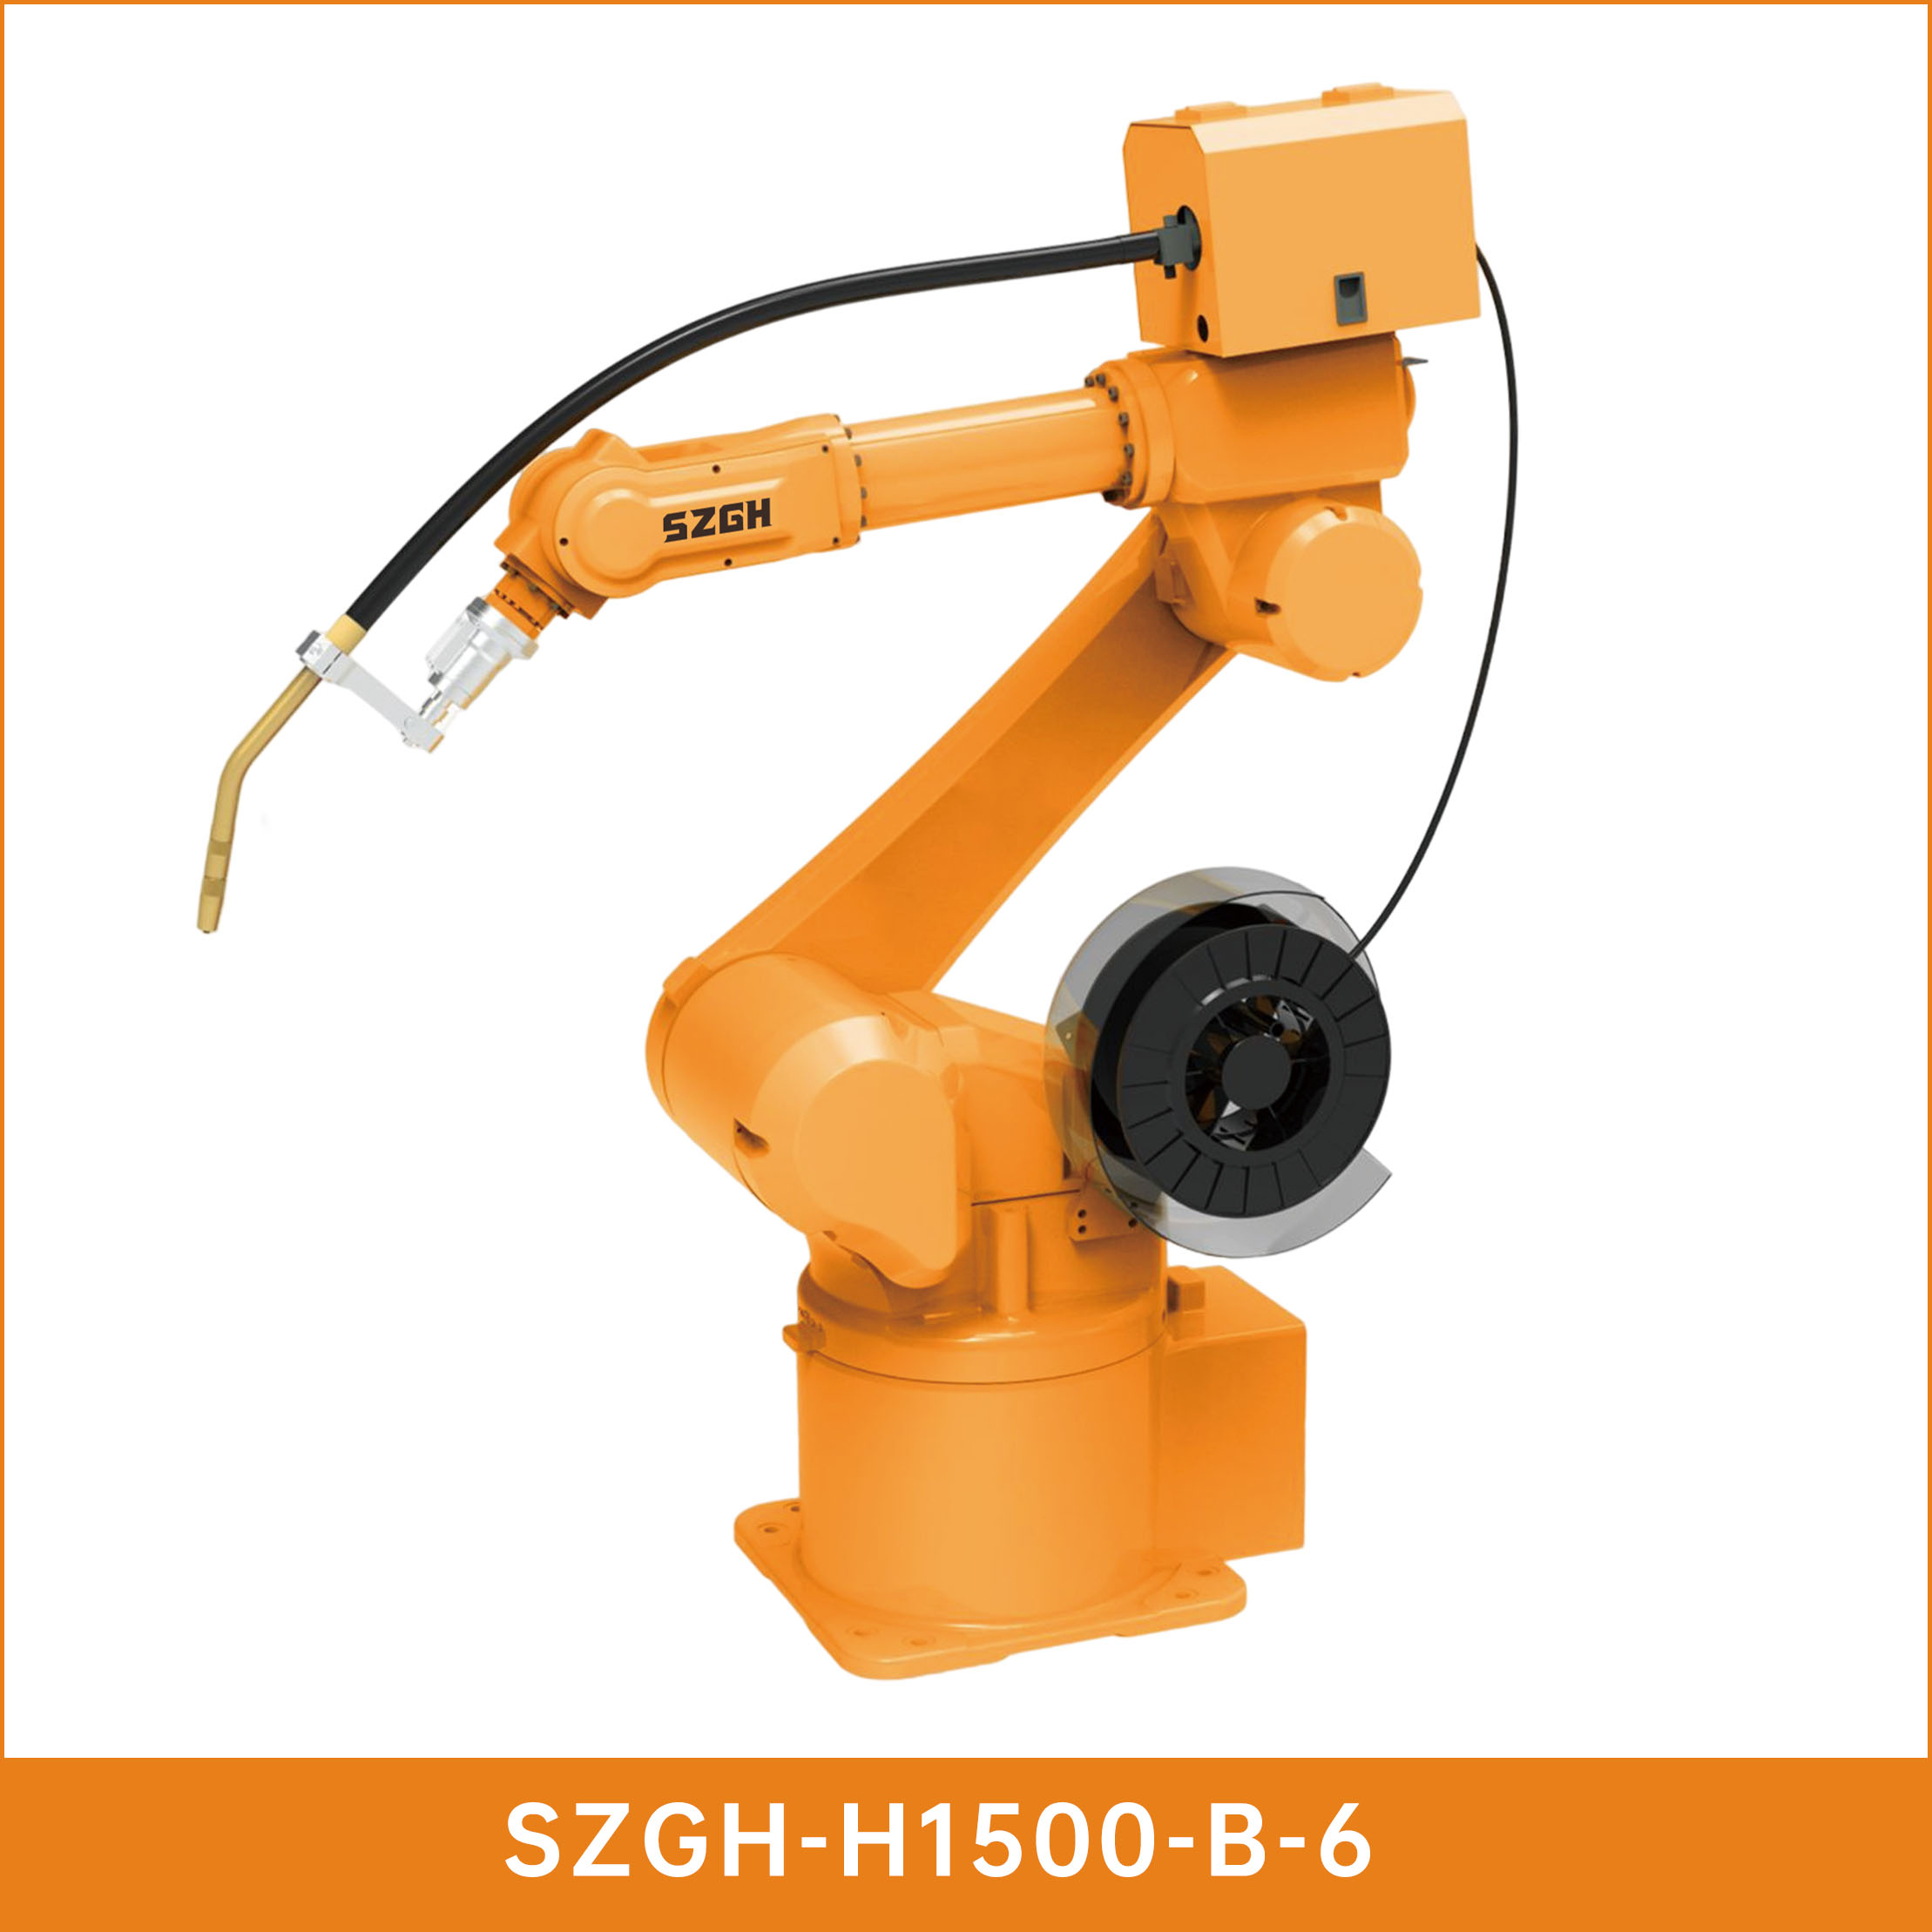 SZGH Welding Robot With Fully Enclosed Axis Positioner